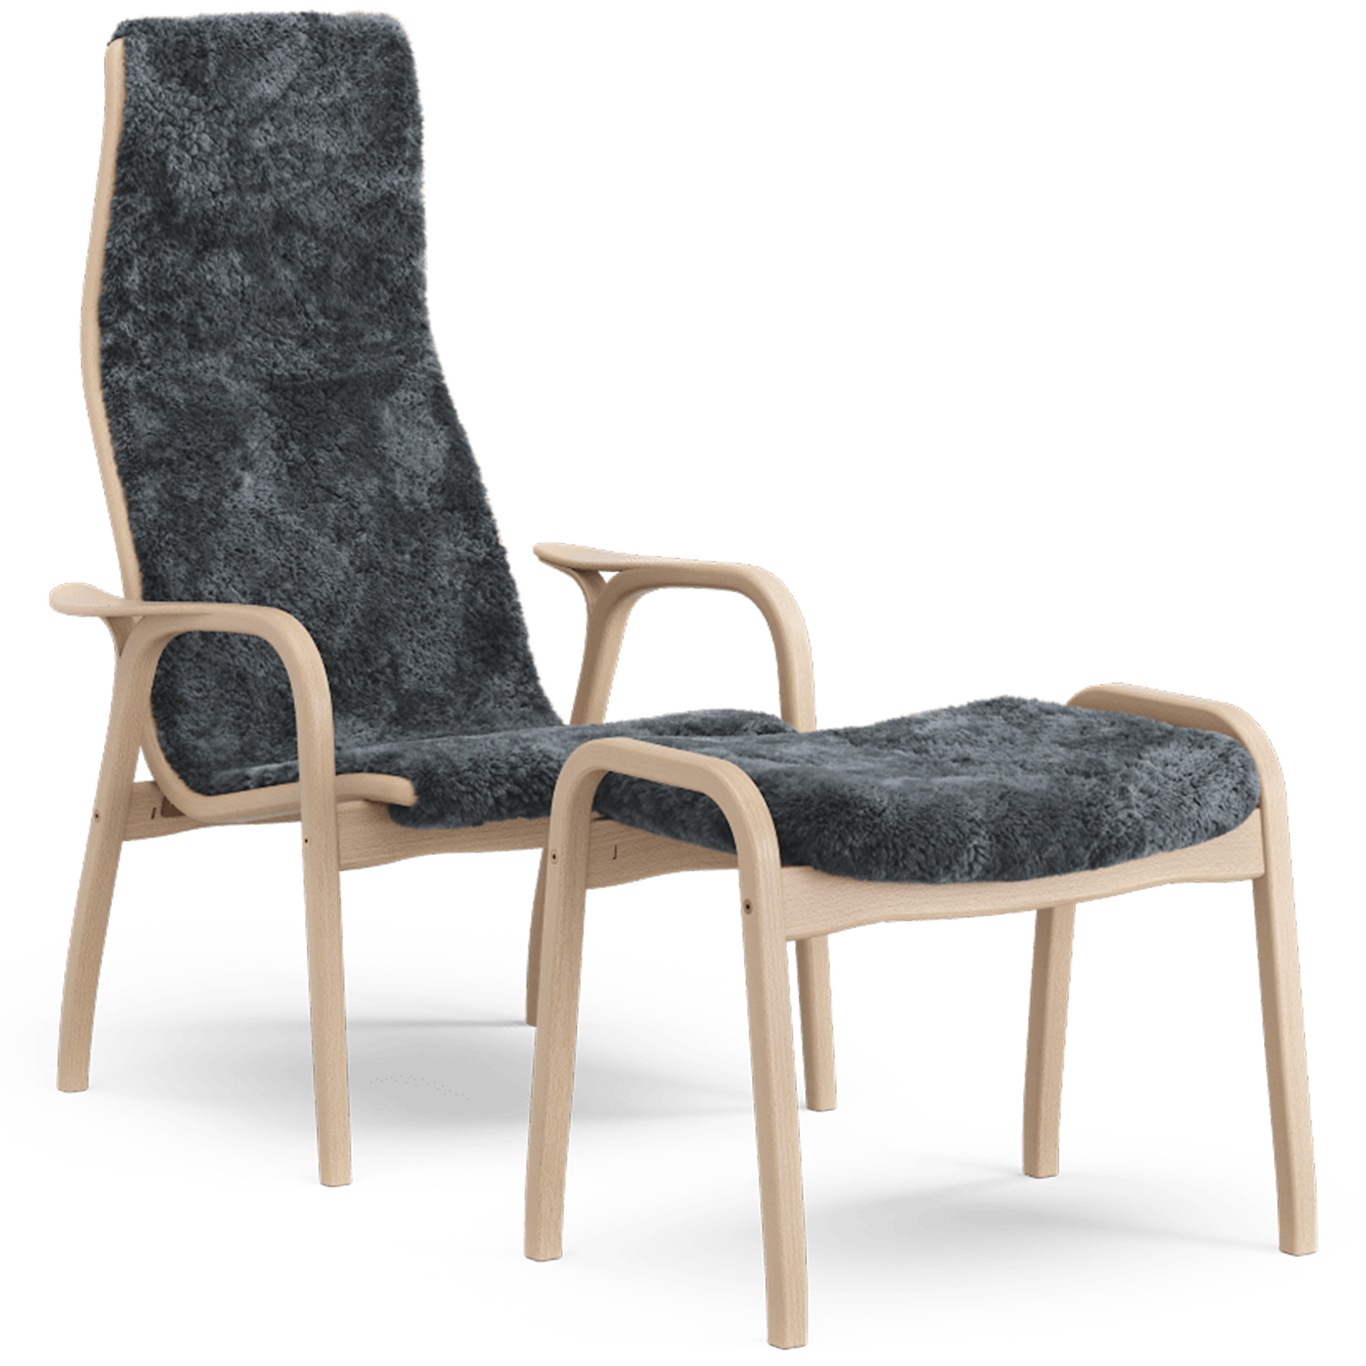 Lamino Armchair With Footstool Sheepskin, Charcoal / Lacquered Beech